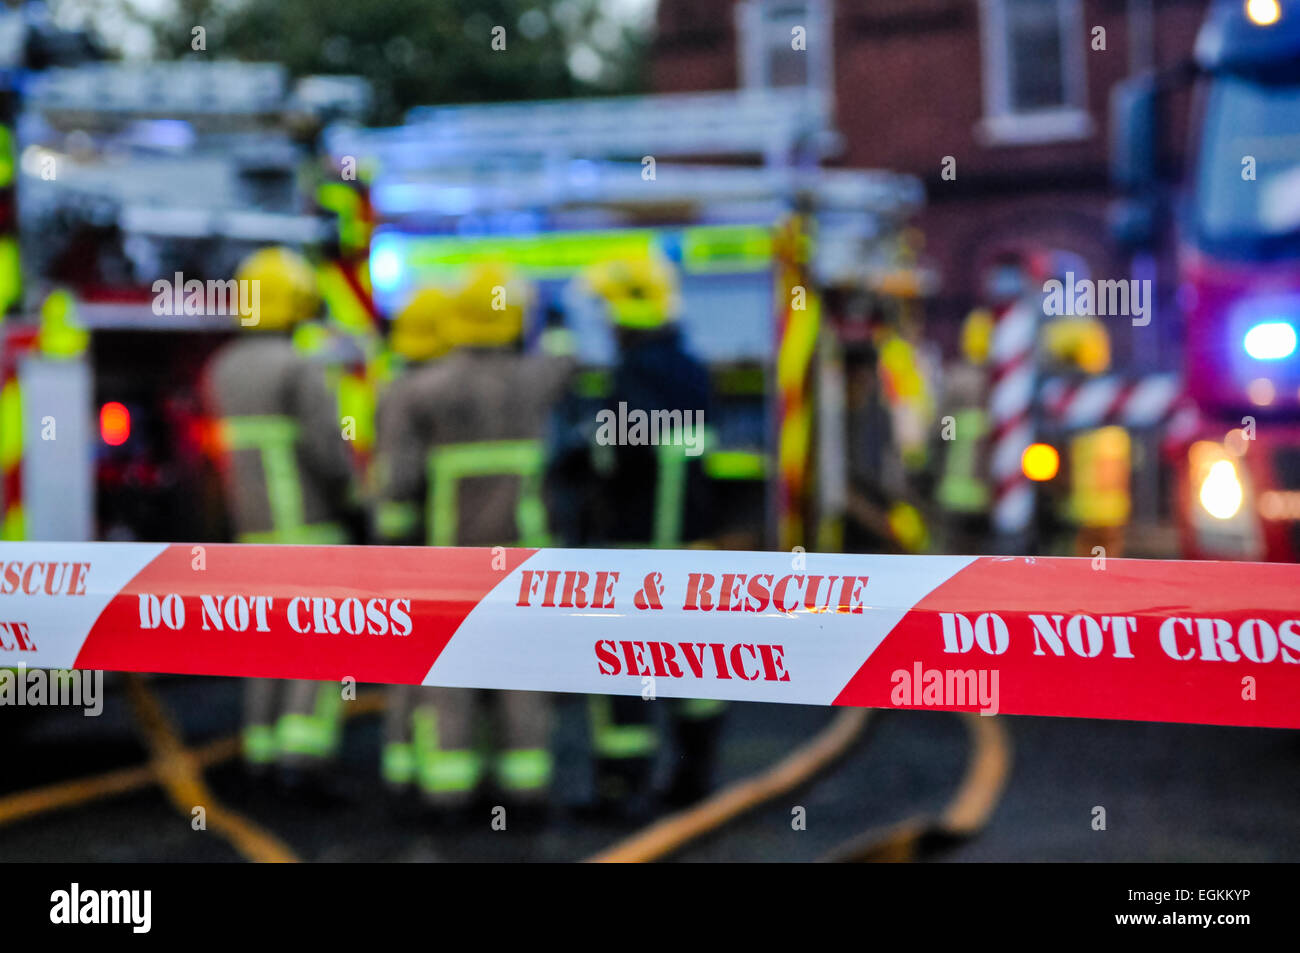 Fire brigade place cordon tape around a suspected arson scene to keep people safe and preserve evidence. Stock Photo